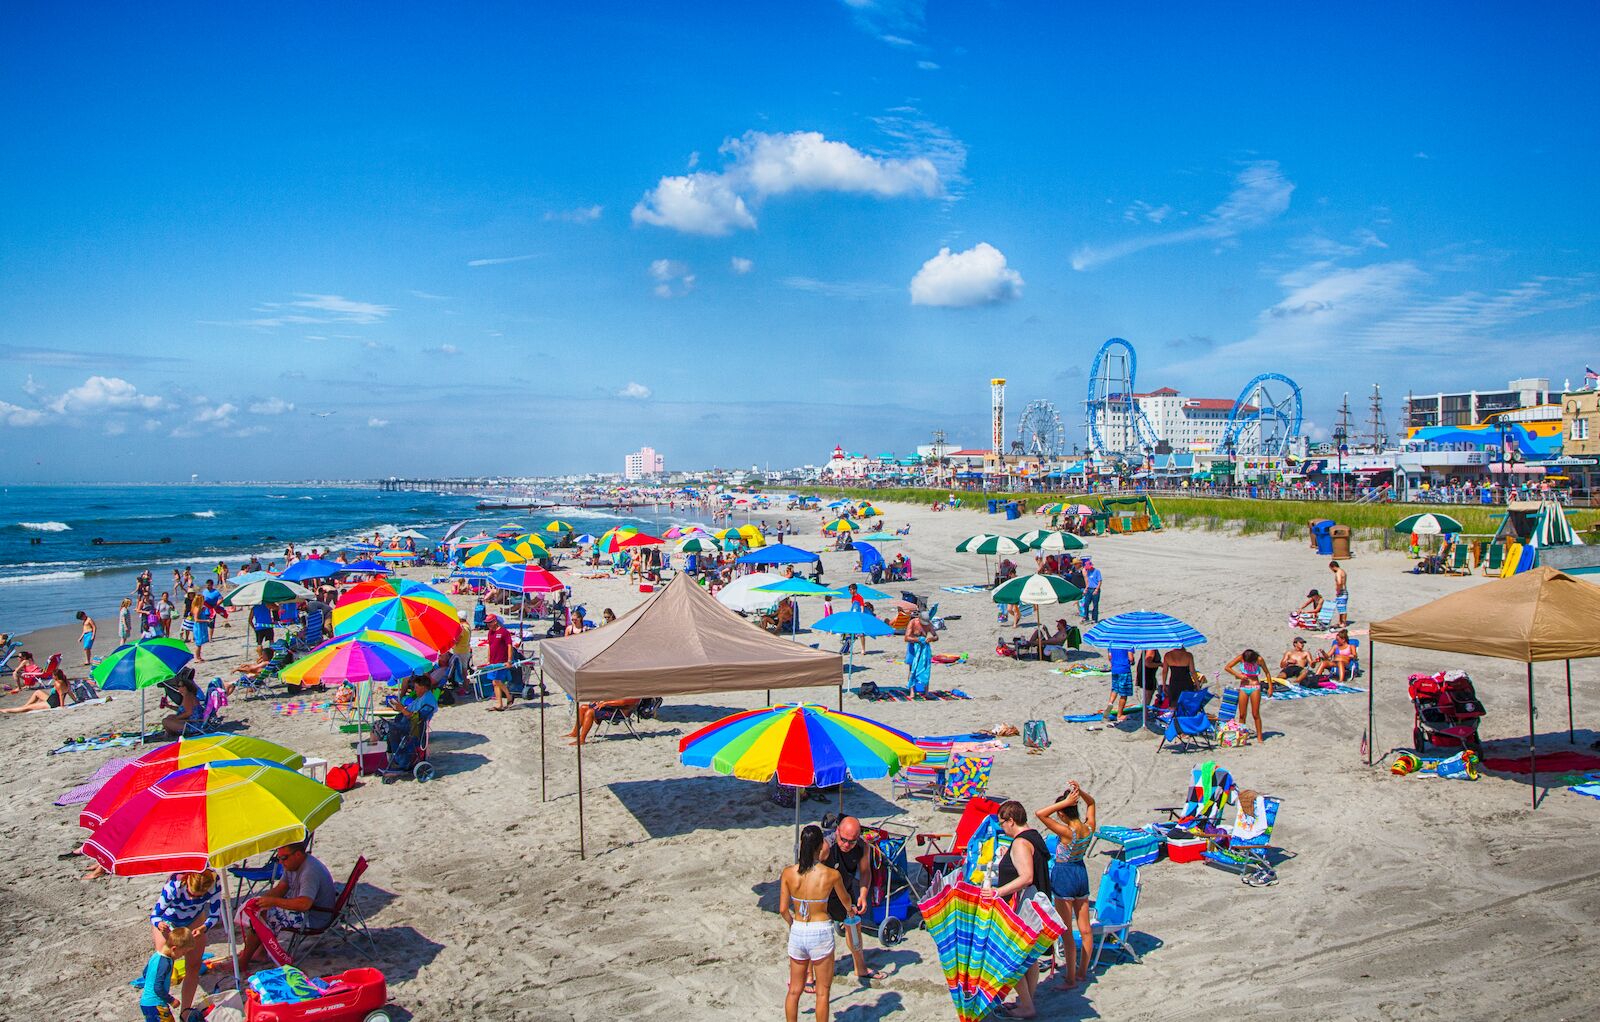 jersey shore beaches crowded ocean city beach with colorful beach umbrellas 